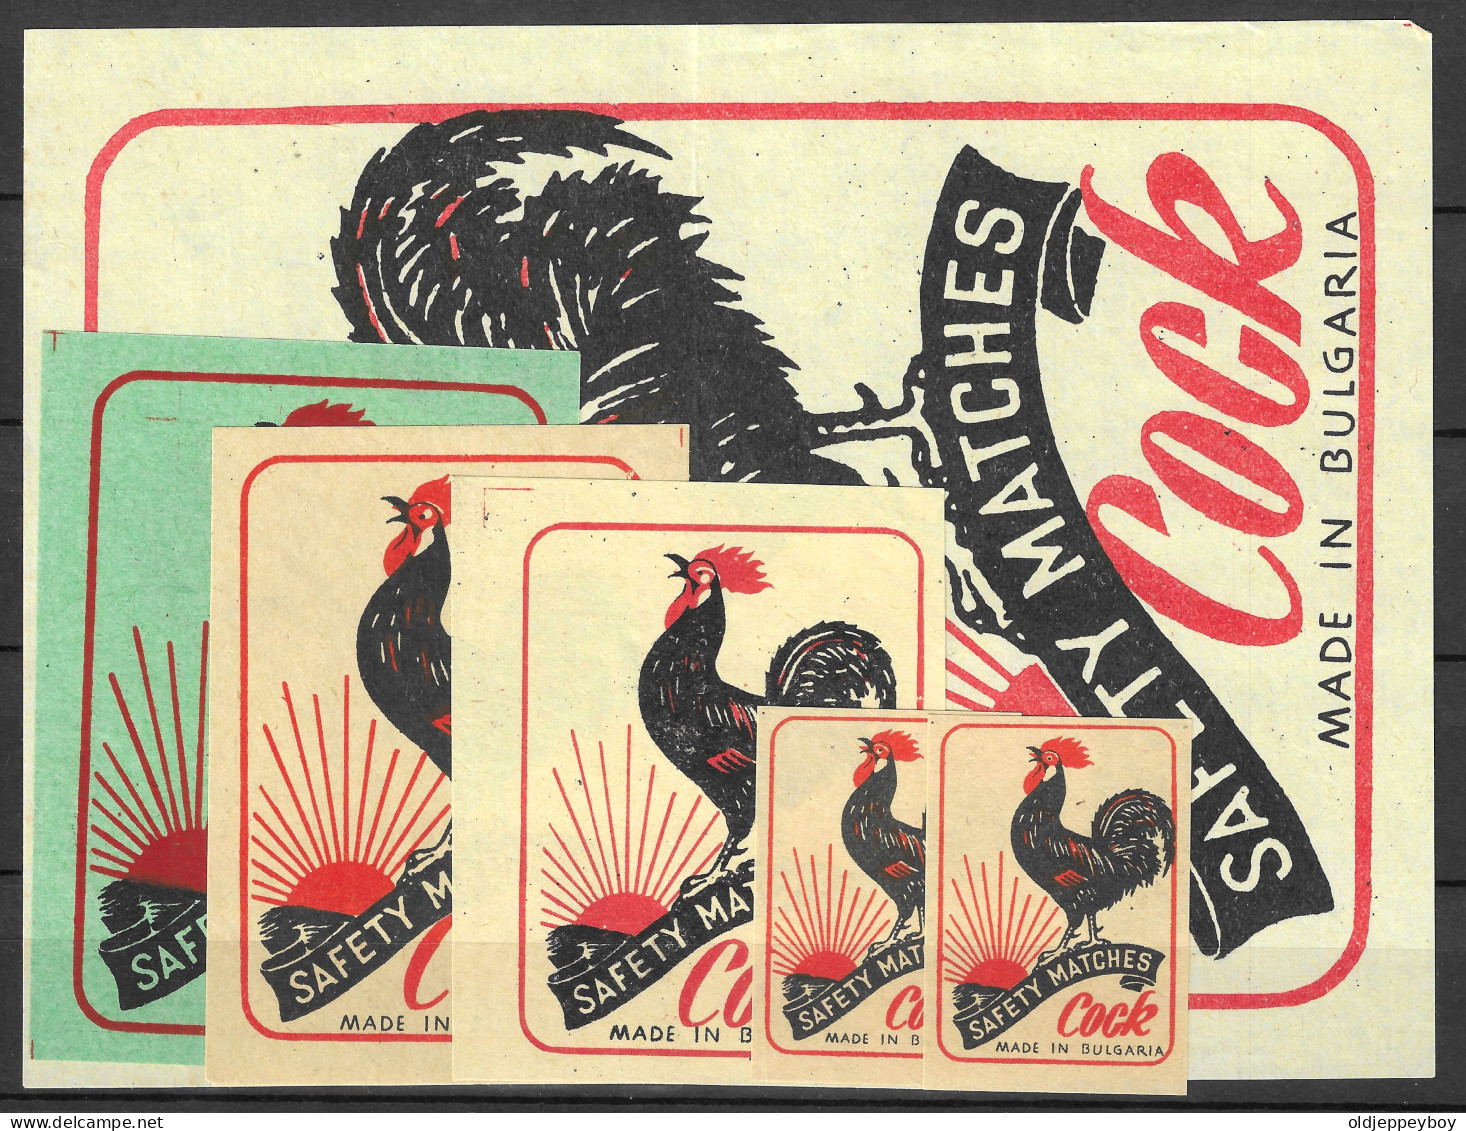  MADE IN BULGARIA MATCHBOX LABEL "COCK "  FULL SET OF 6 DIF SIZES SEE SCAN FOR SIZES EXTRA  LARGE RARE - Luciferdozen - Etiketten